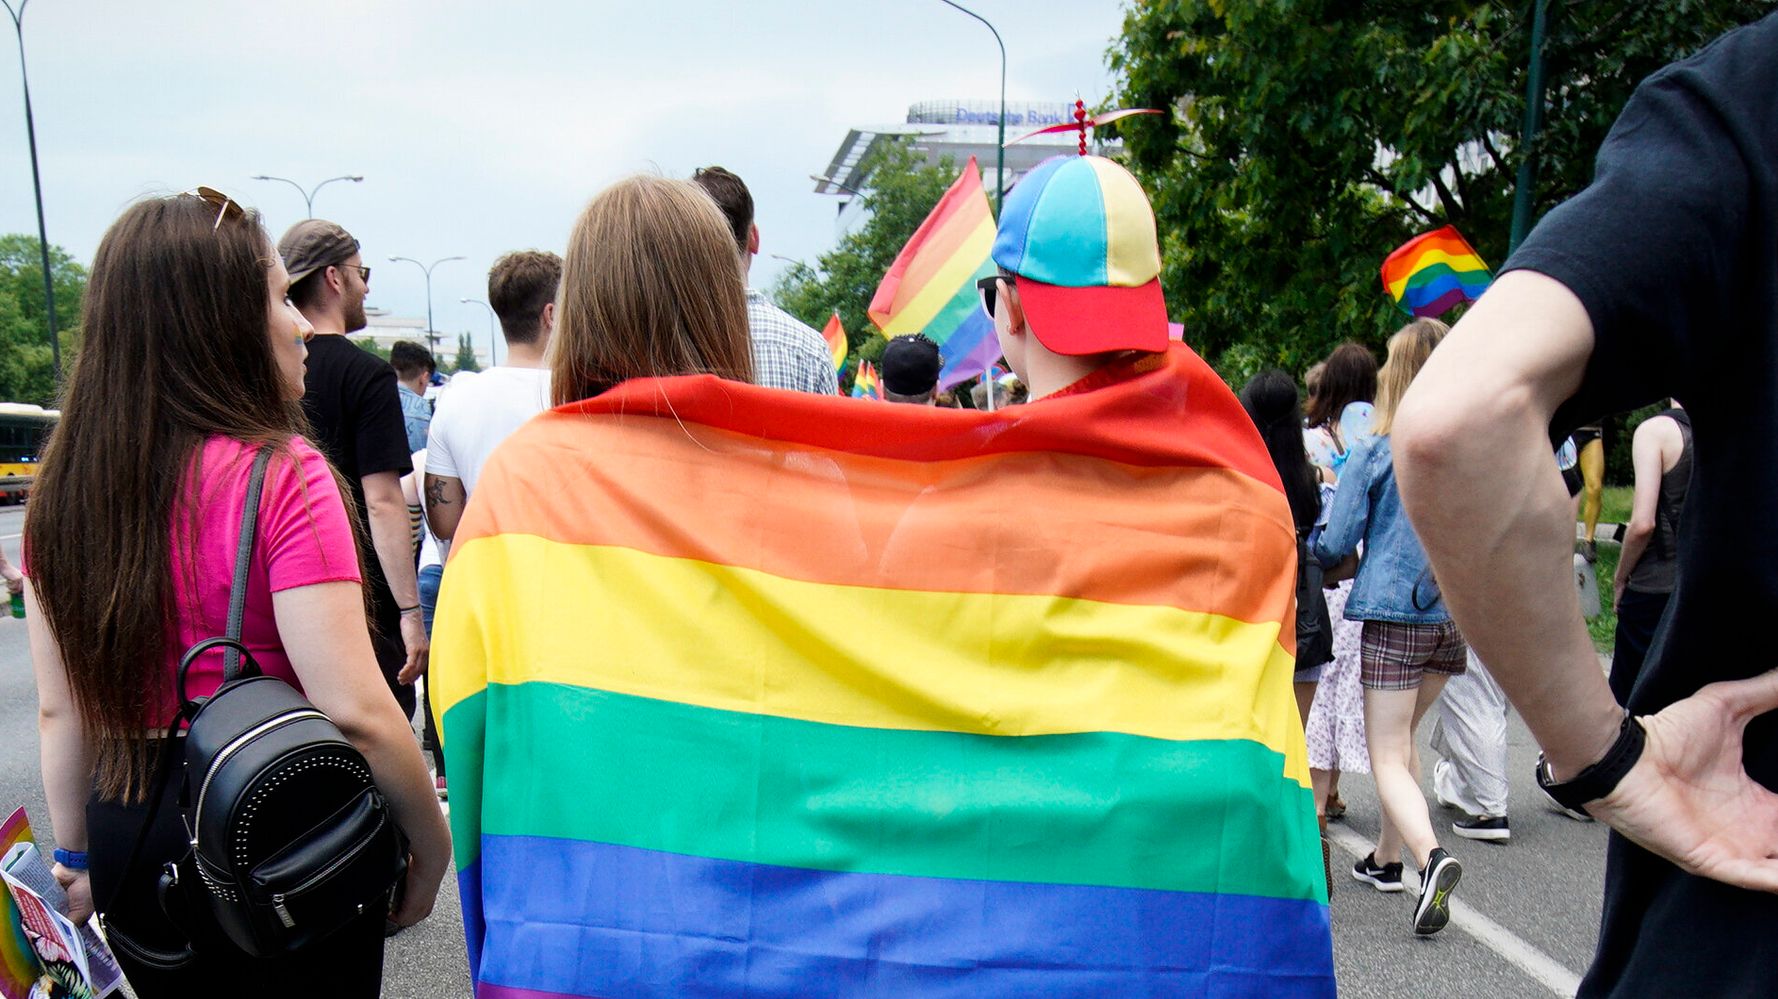 New Research Finds 40% of LGBTQ Youth Considered Suicide Over Past Year ...